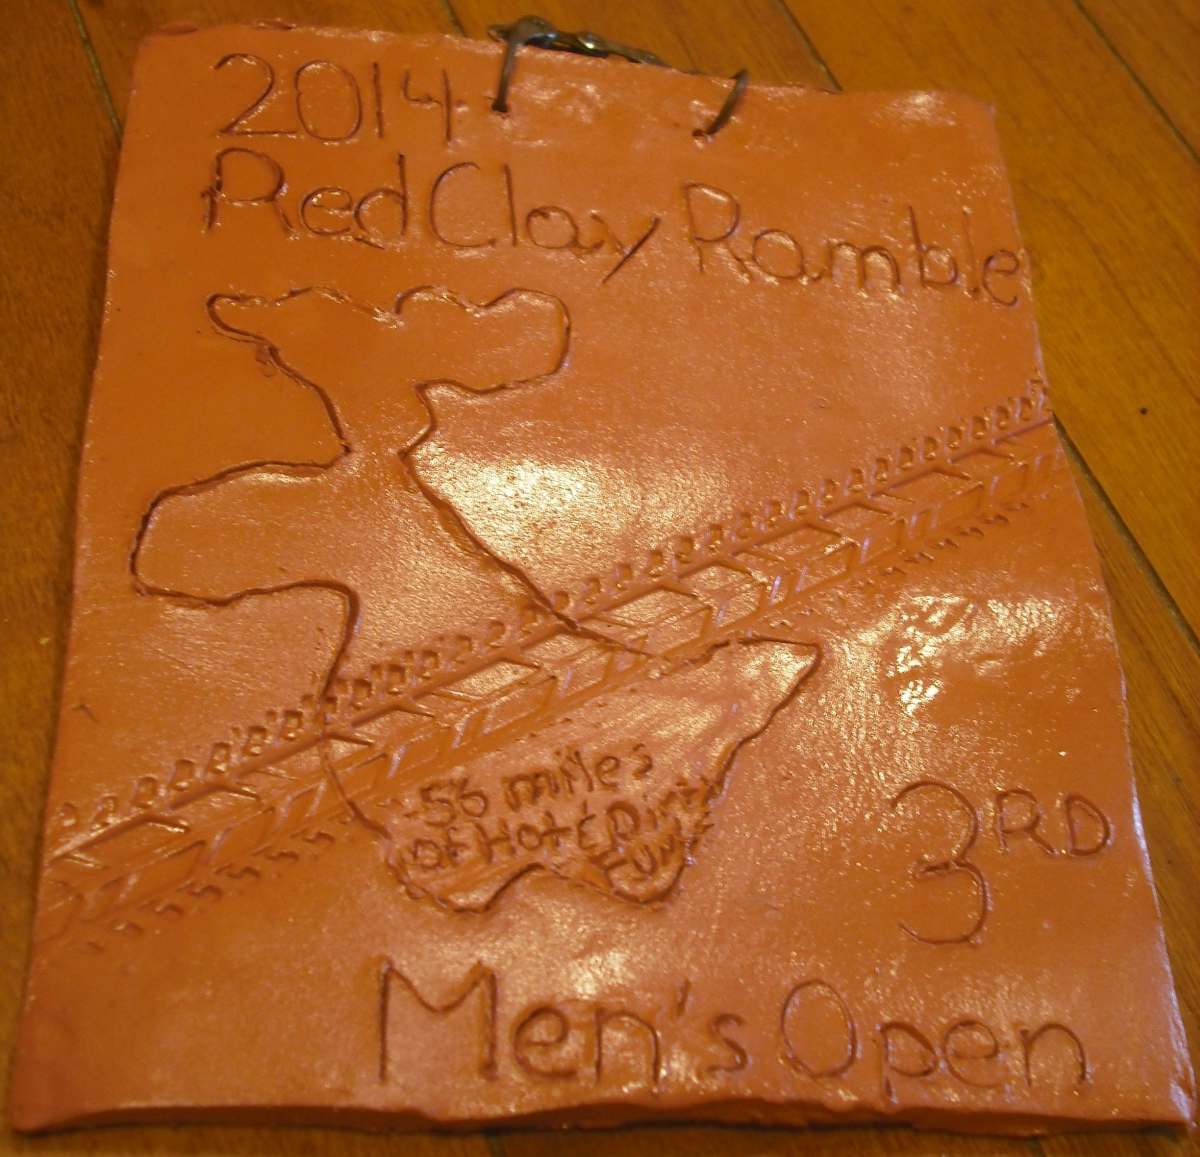 2014 red clay ramble